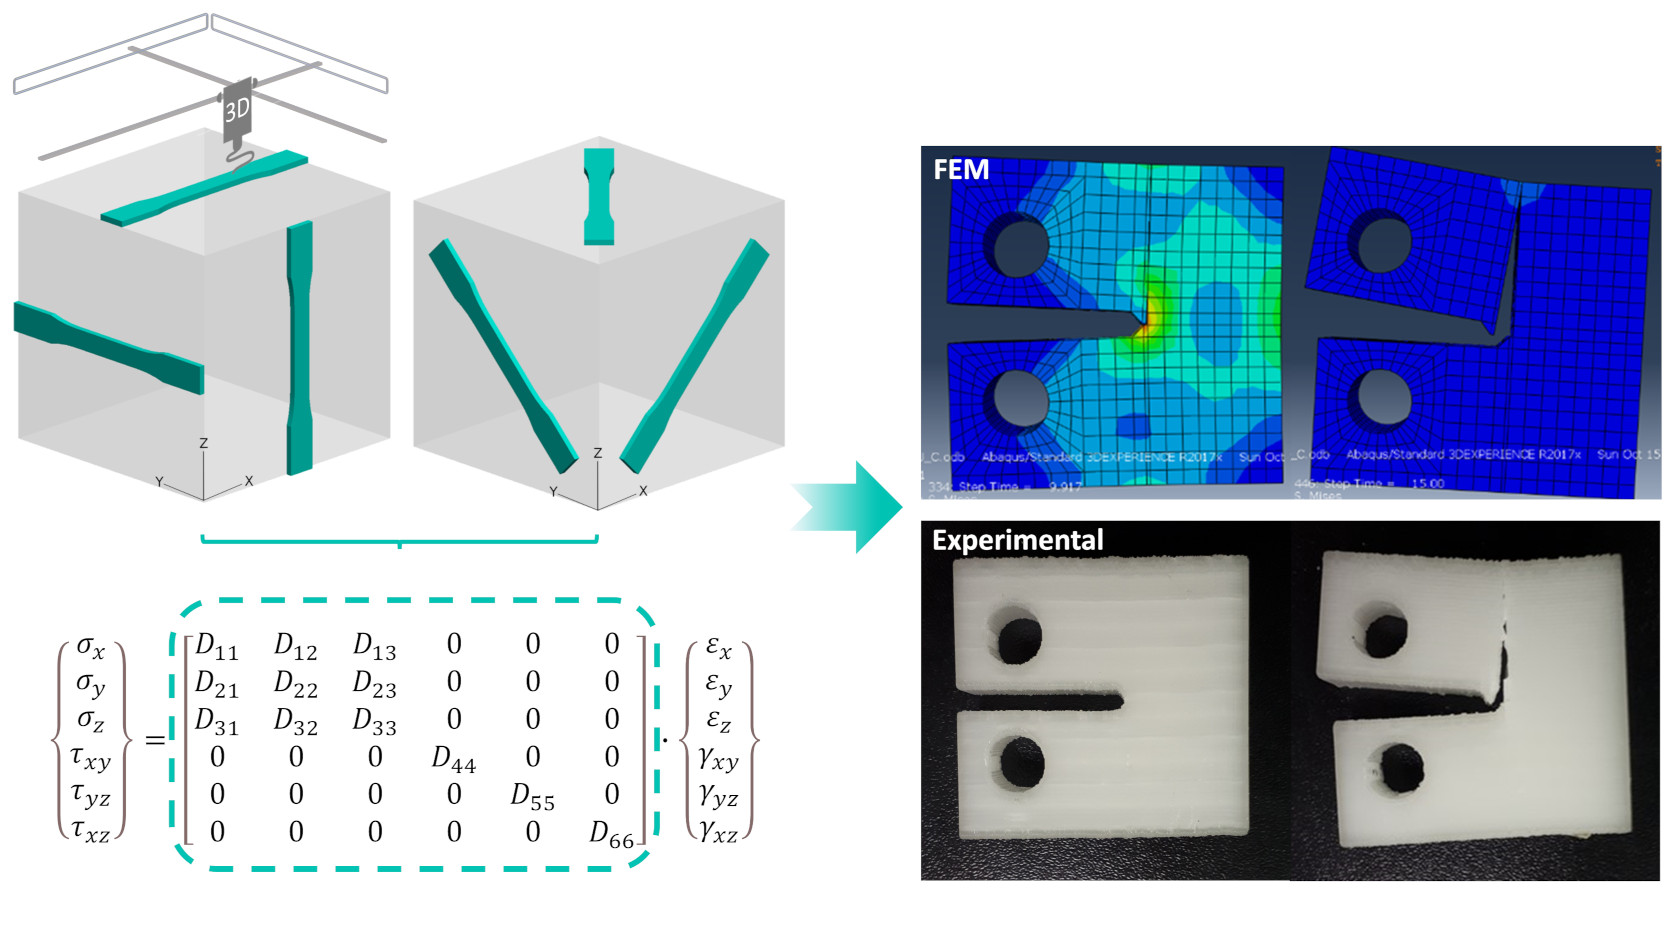 Modeling the fracture behavior of 3D-printed PLA as a laminate composite